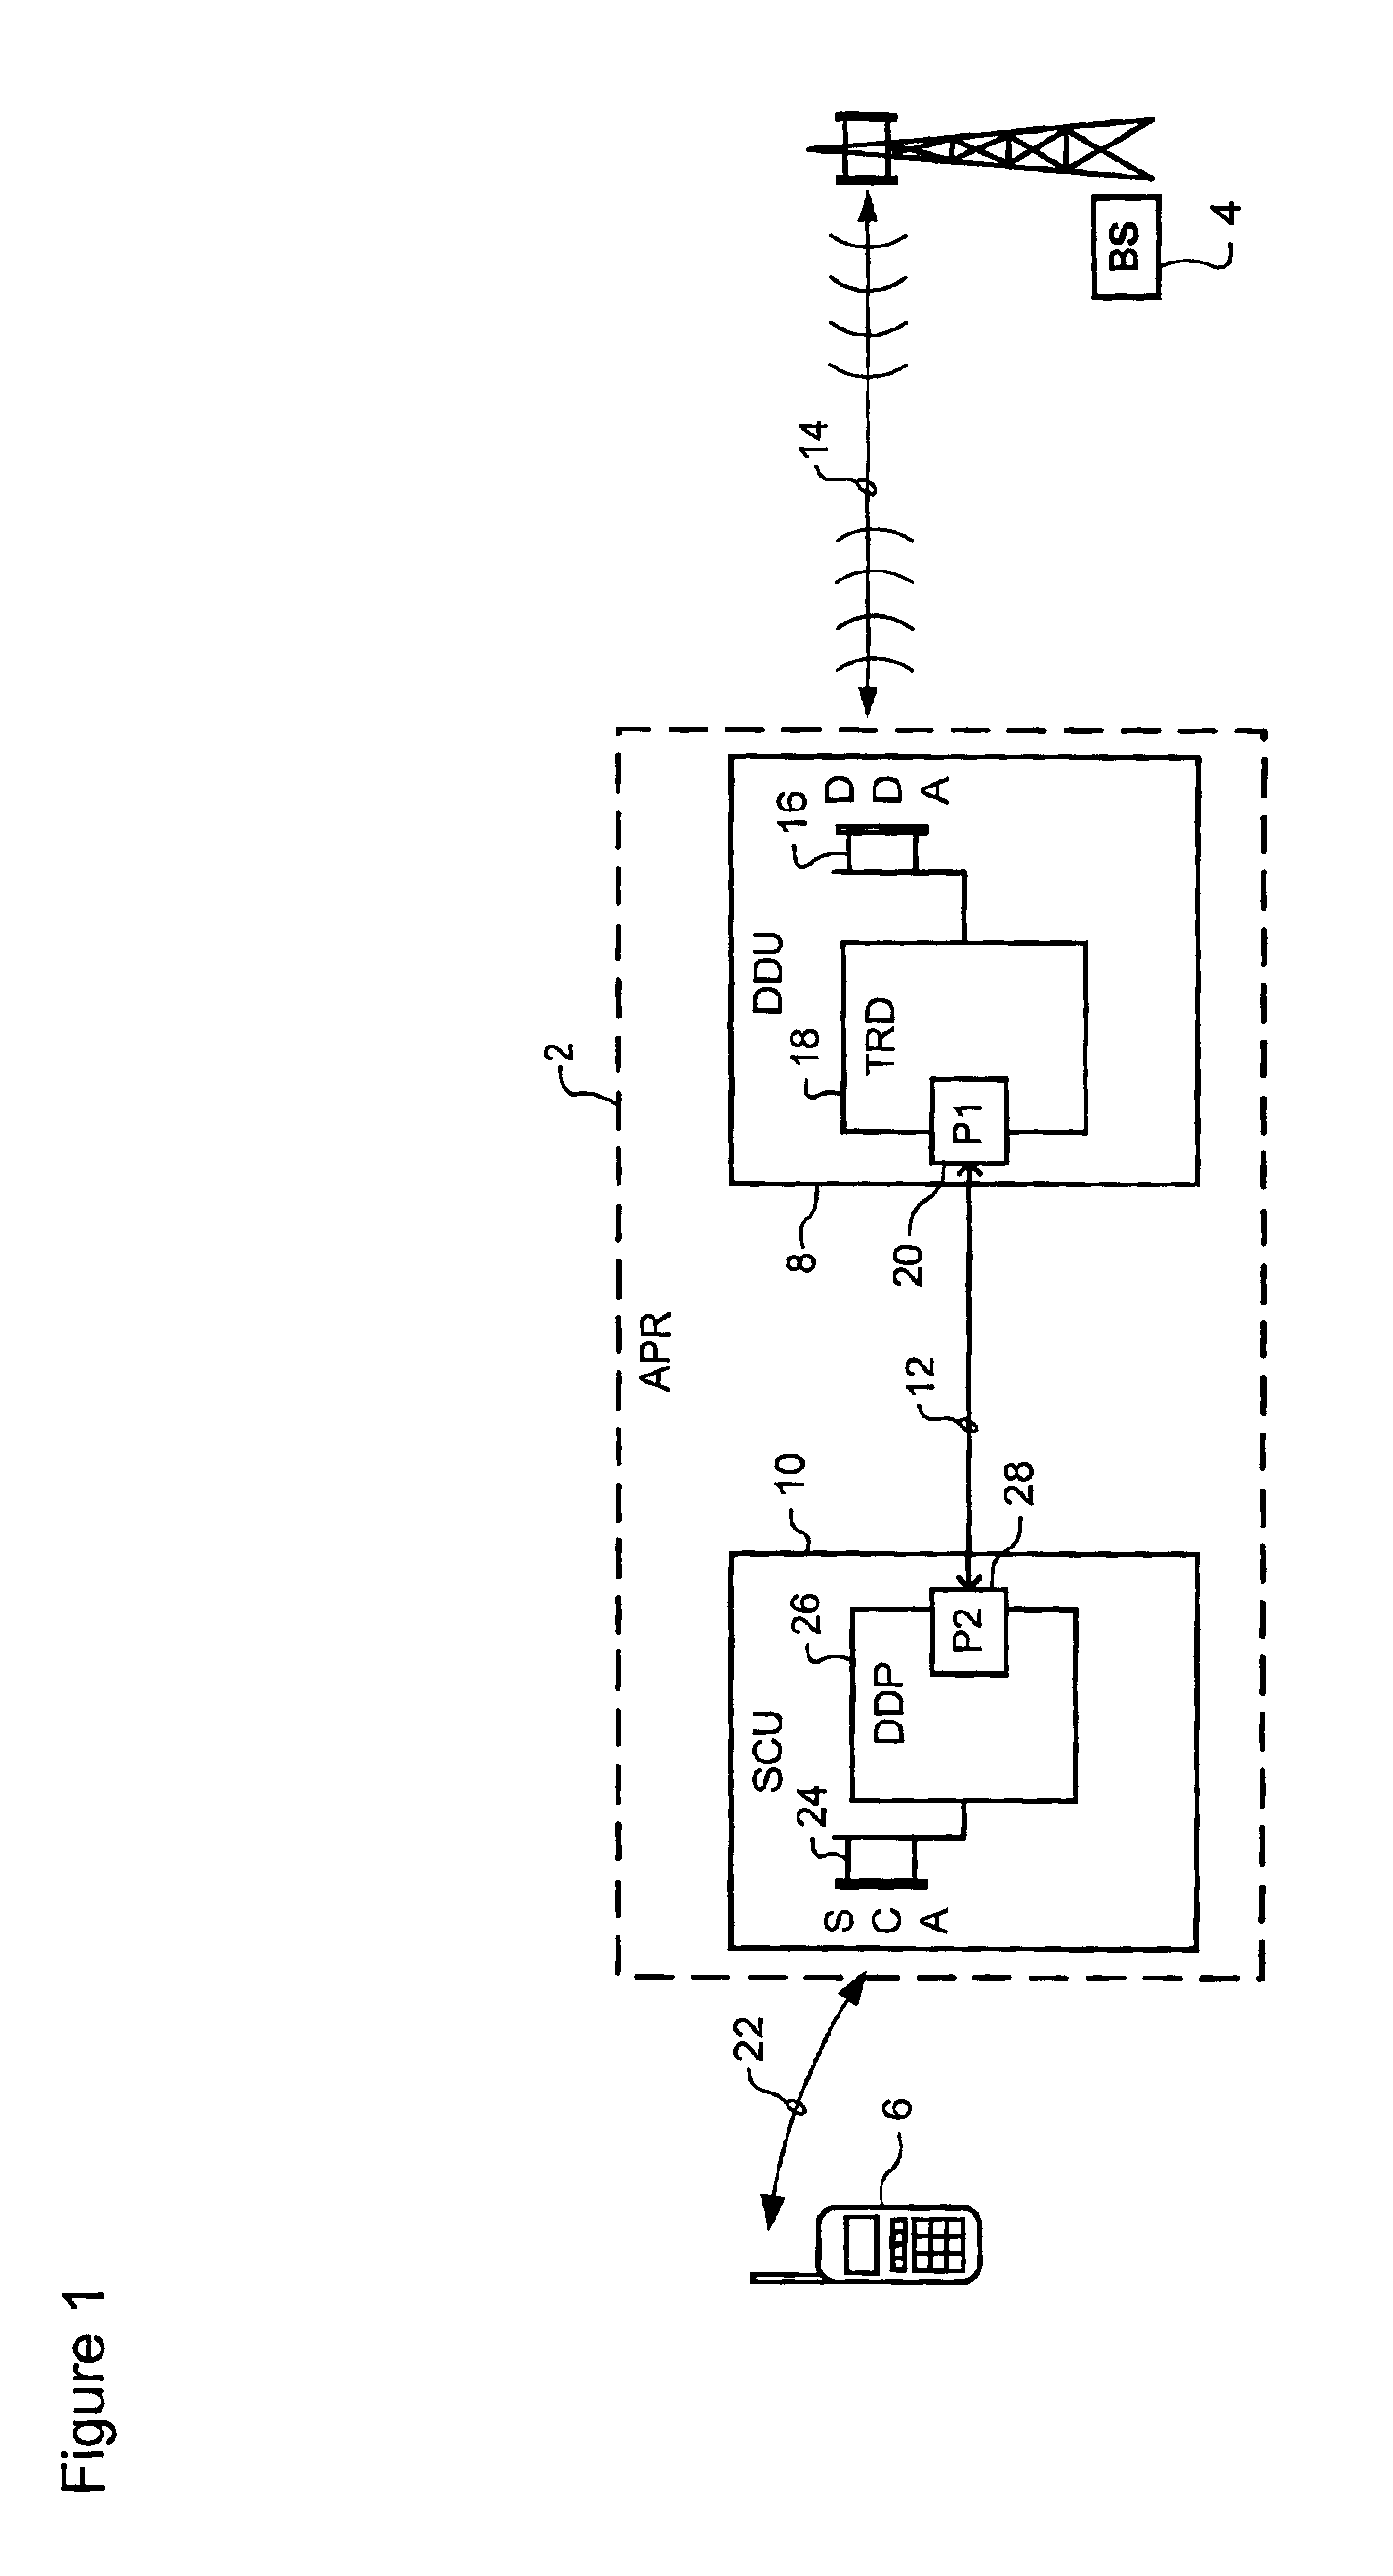 Intelligent gain control in an on-frequency repeater